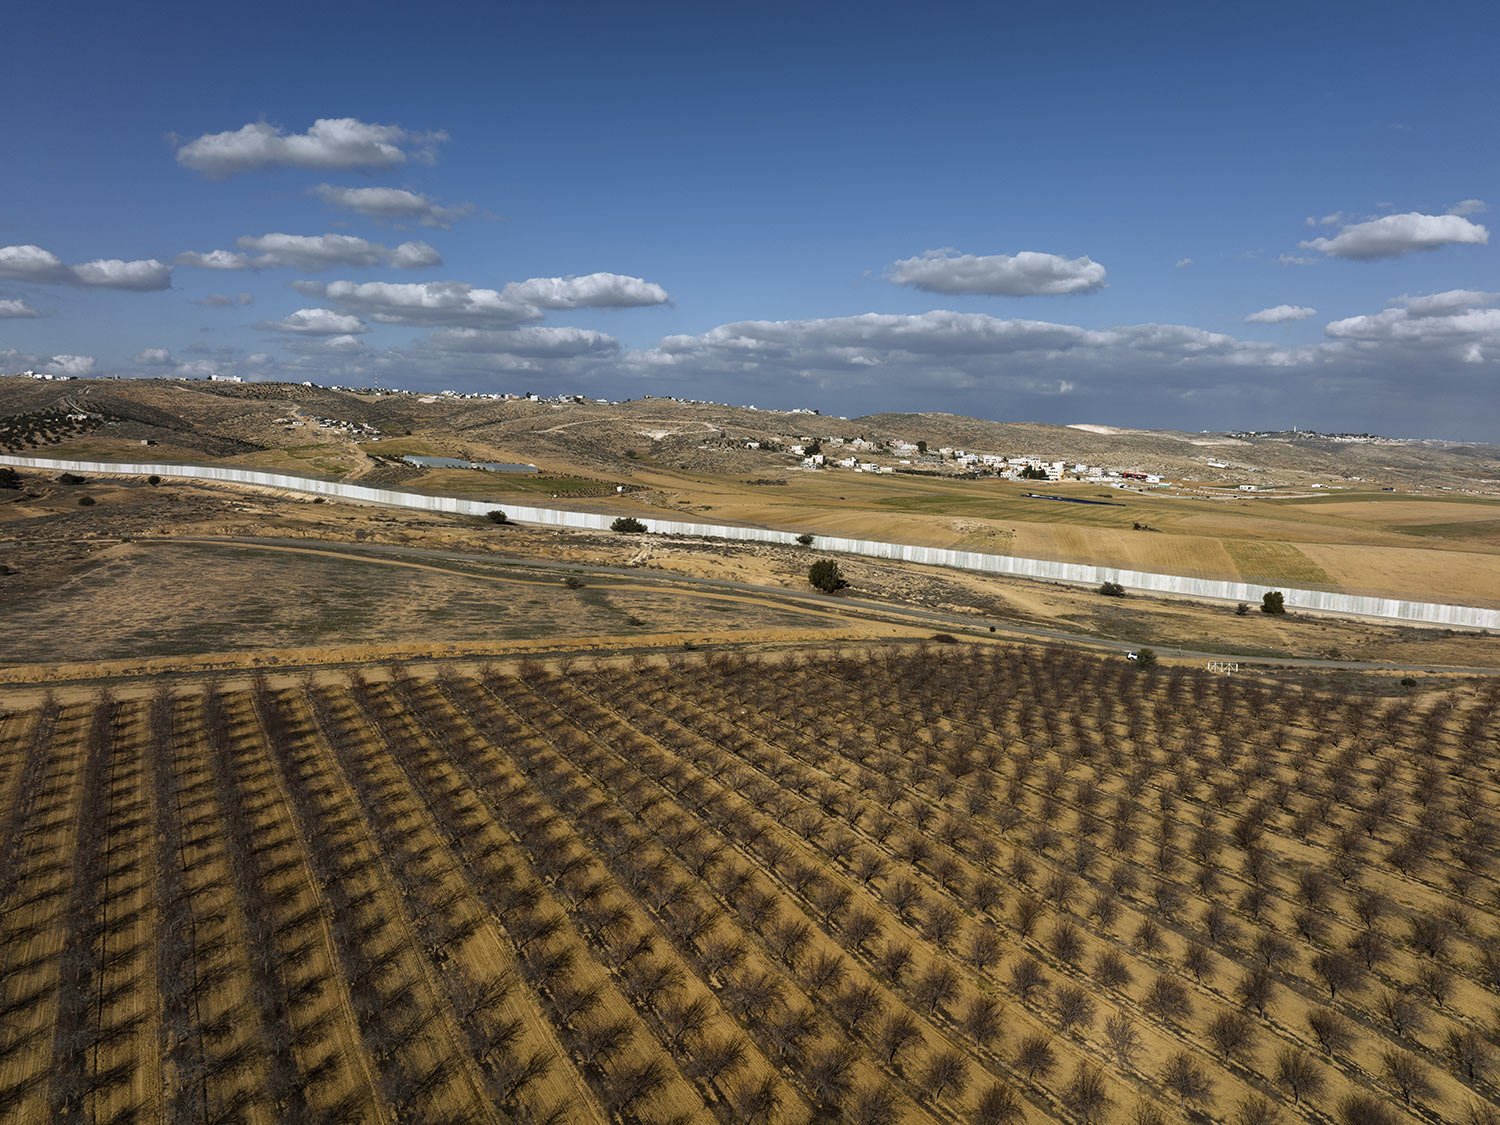  A section of Israel's separation barrier cuts between Israel kibbutz Kramim and the southern West Bank village of Arab al Fureijat, Feb. 1, 2022. (AP Photo/Oded Balilty) 